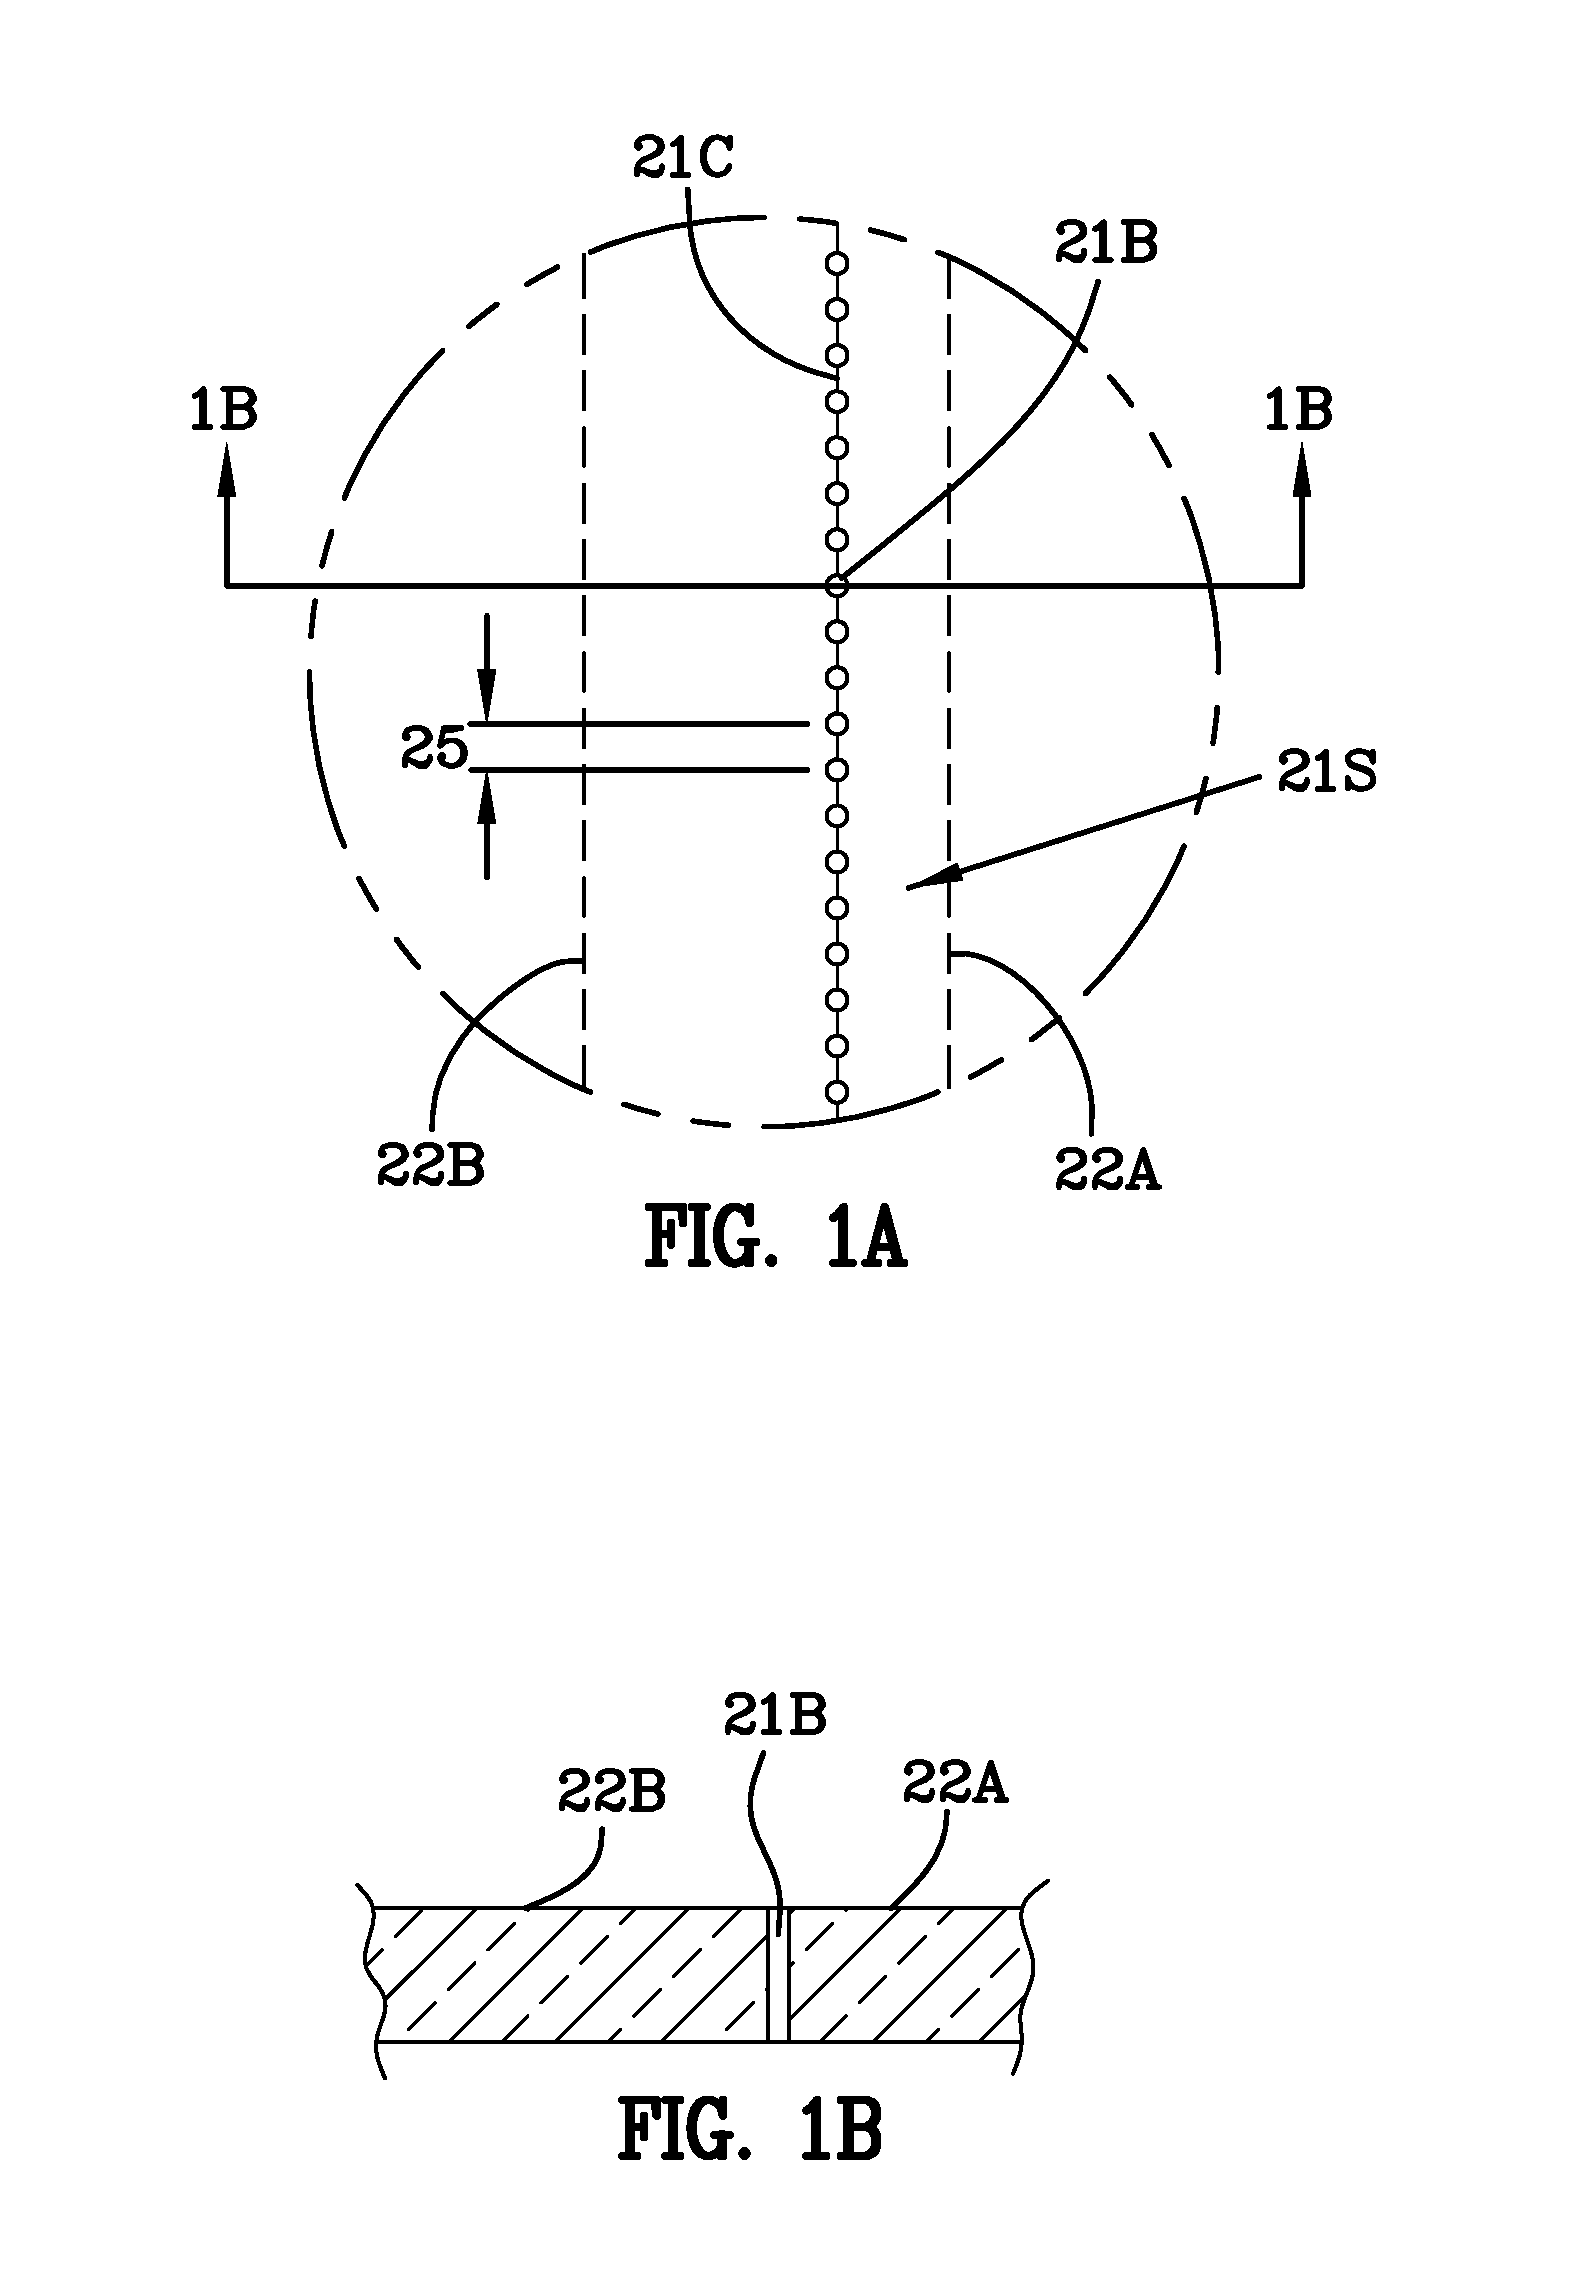 Method of closed form release for brittle materials using burst ultrafast laser pulses